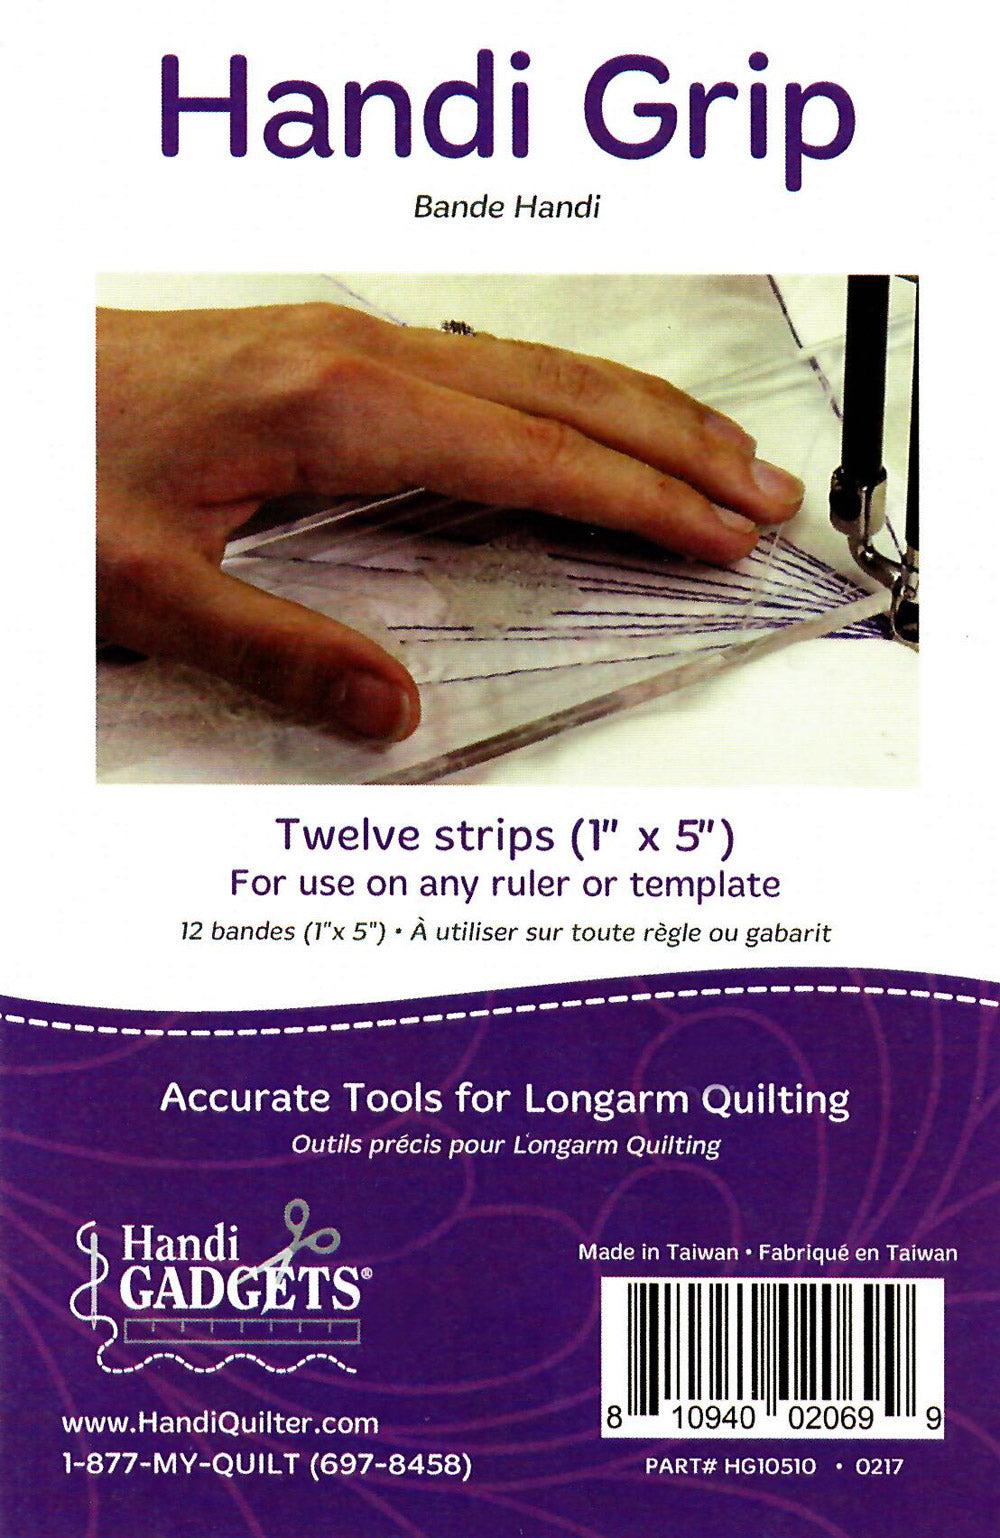 Guidelines4quilting Prep-Tool